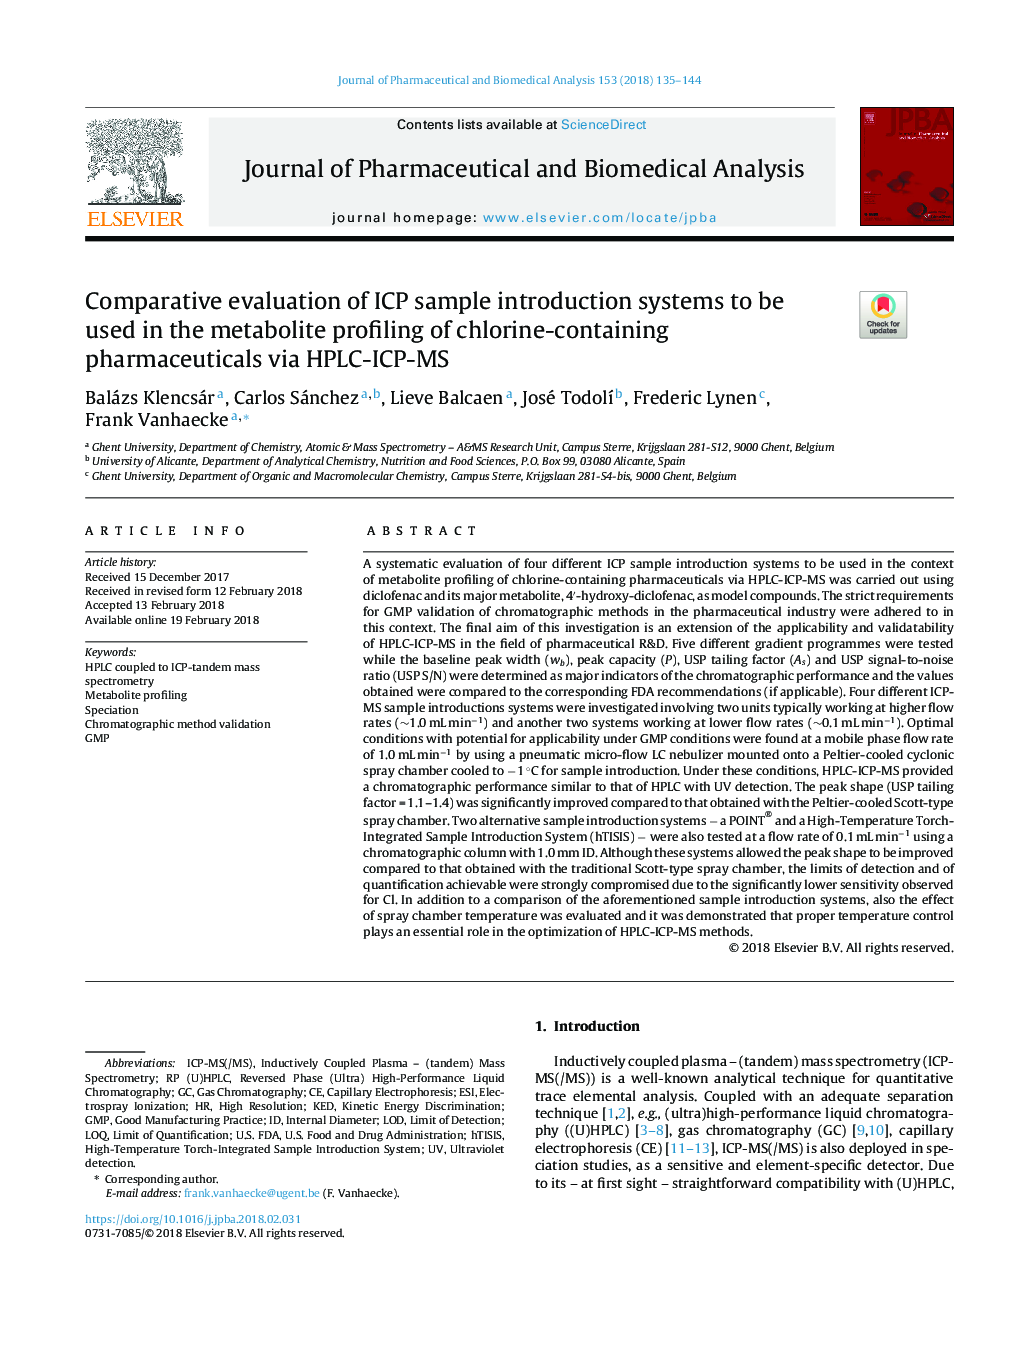 Comparative evaluation of ICP sample introduction systems to be used in the metabolite profiling of chlorine-containing pharmaceuticals via HPLC-ICP-MS